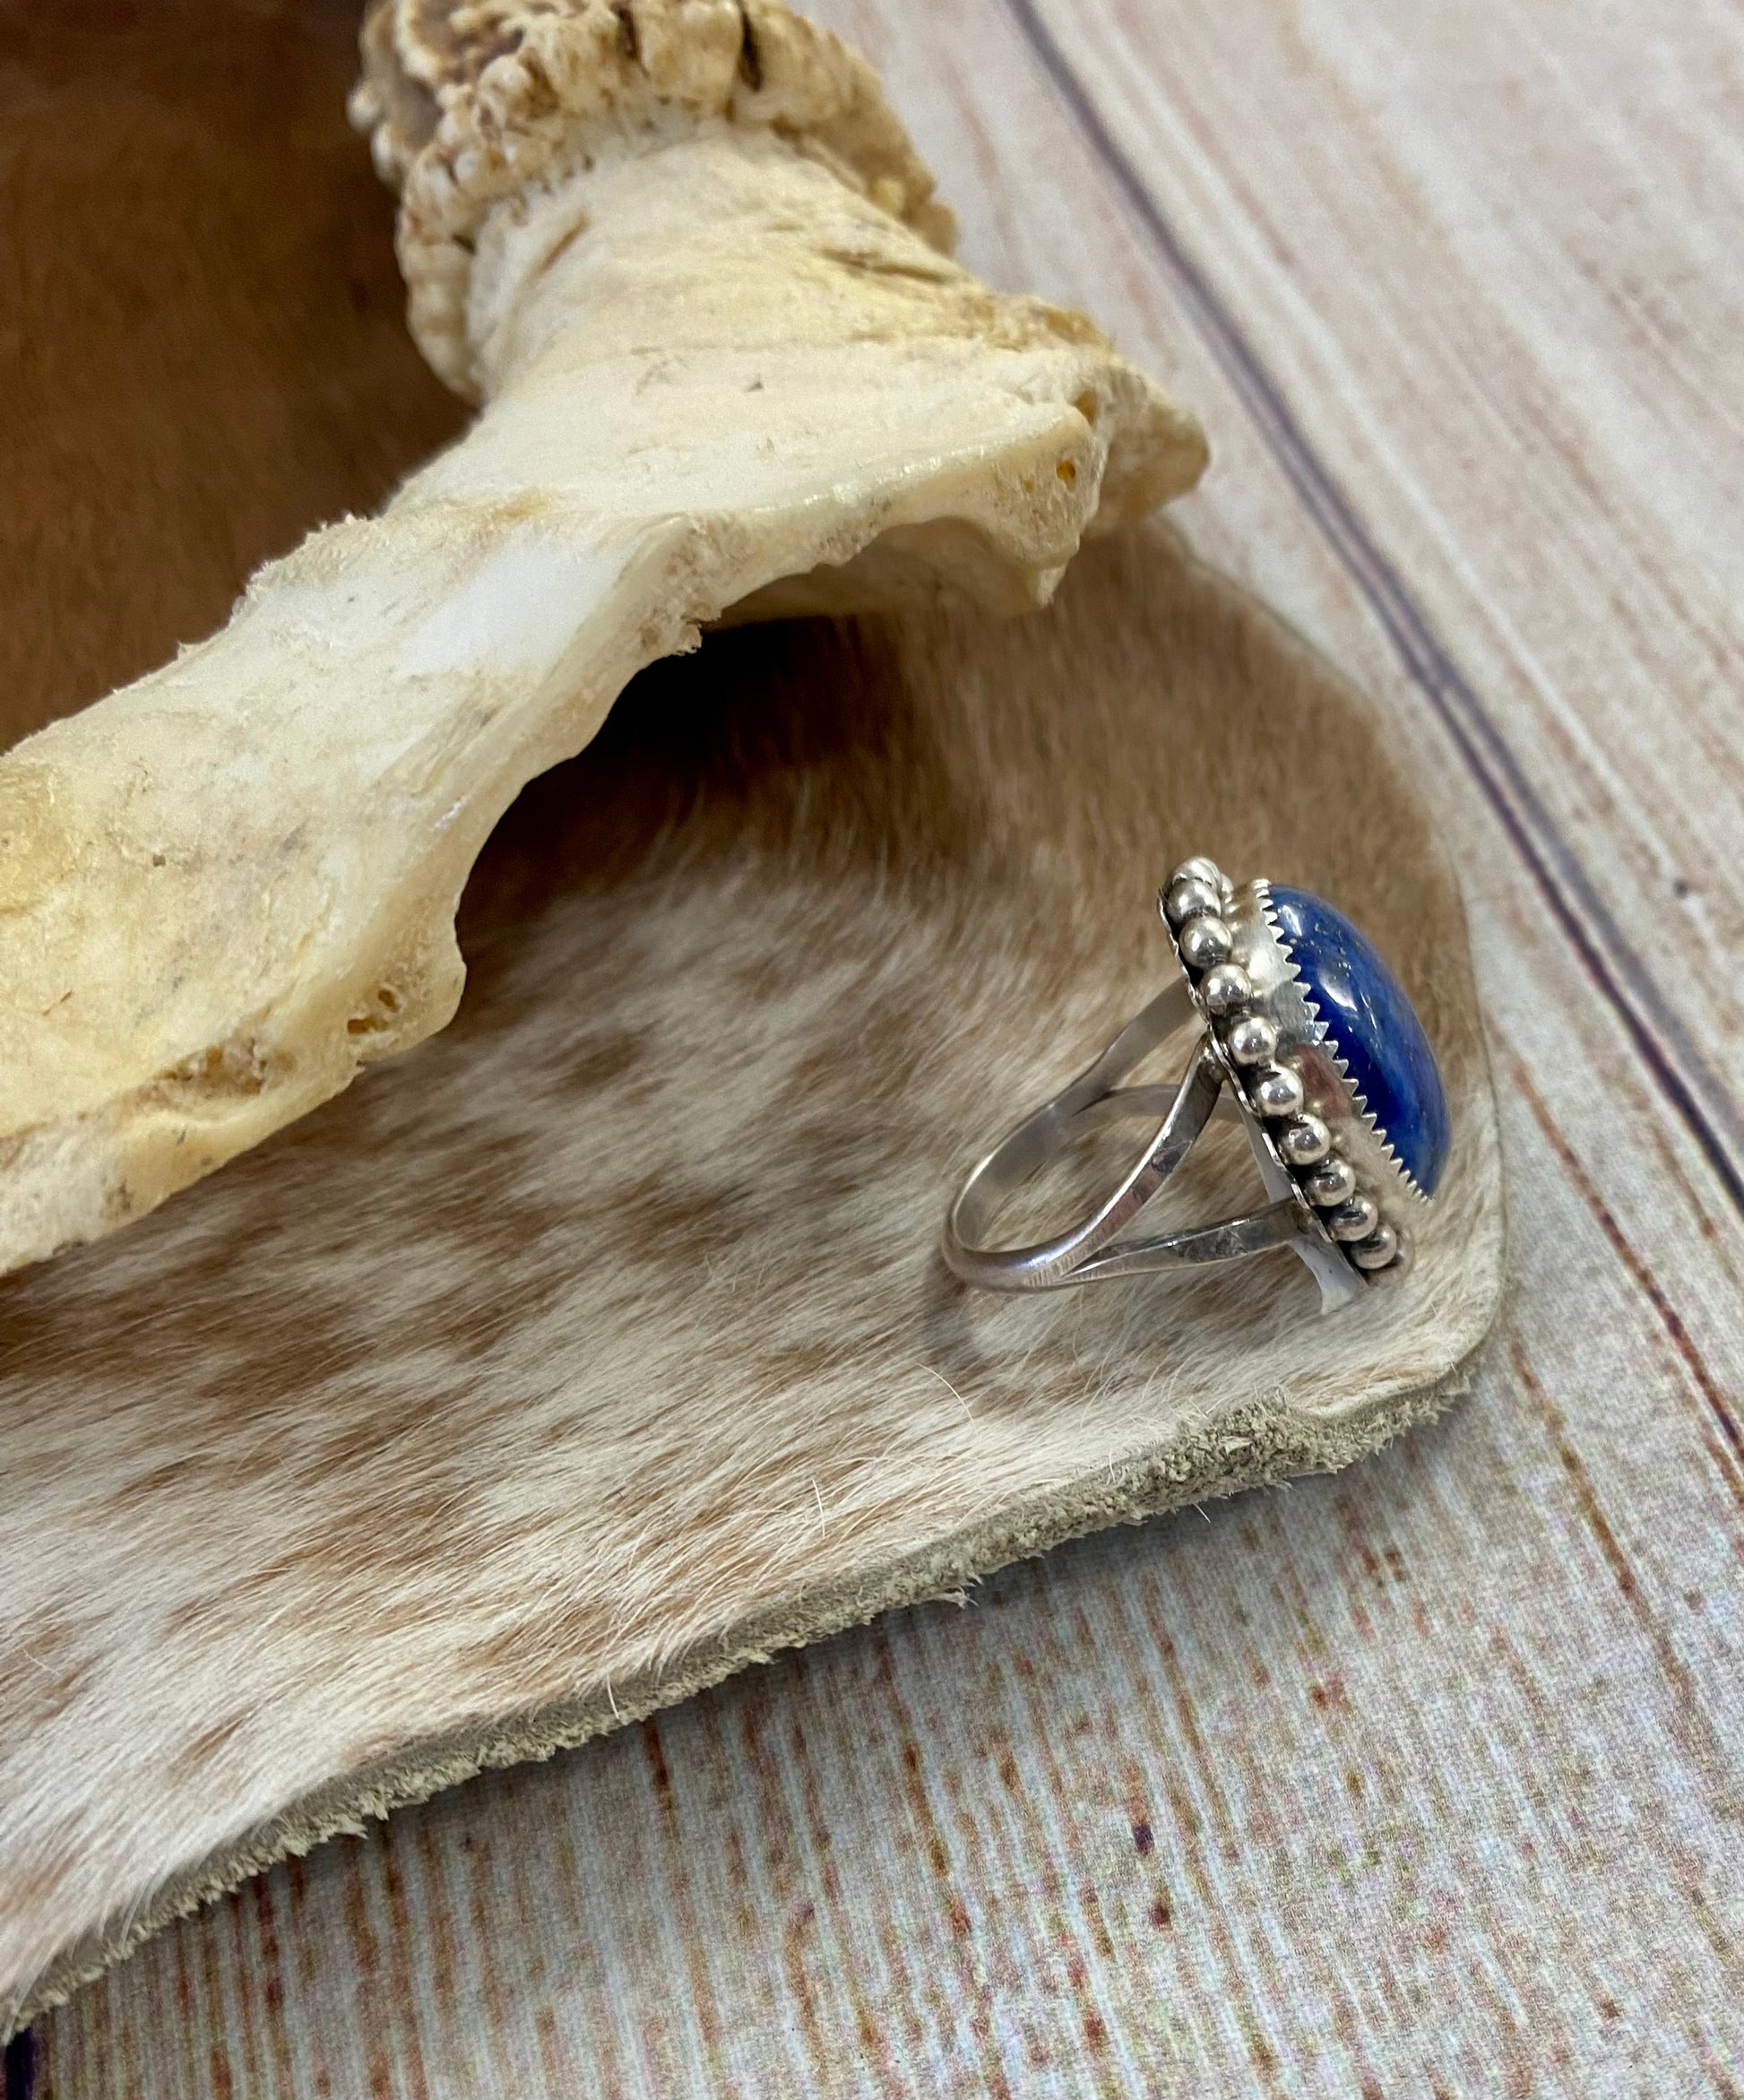 Beautiful single stone simple yet striking sterling silver blue lapis round size 7 ring. This piece is stamped Sterling and signed B on the back by Native American artist silversmith. A gorgeous ring that will add a pop of color to any outfit.   Signed: YES “B”  Ring Size: 7  Size: 1” inch length   Stone: Blue Lapis 